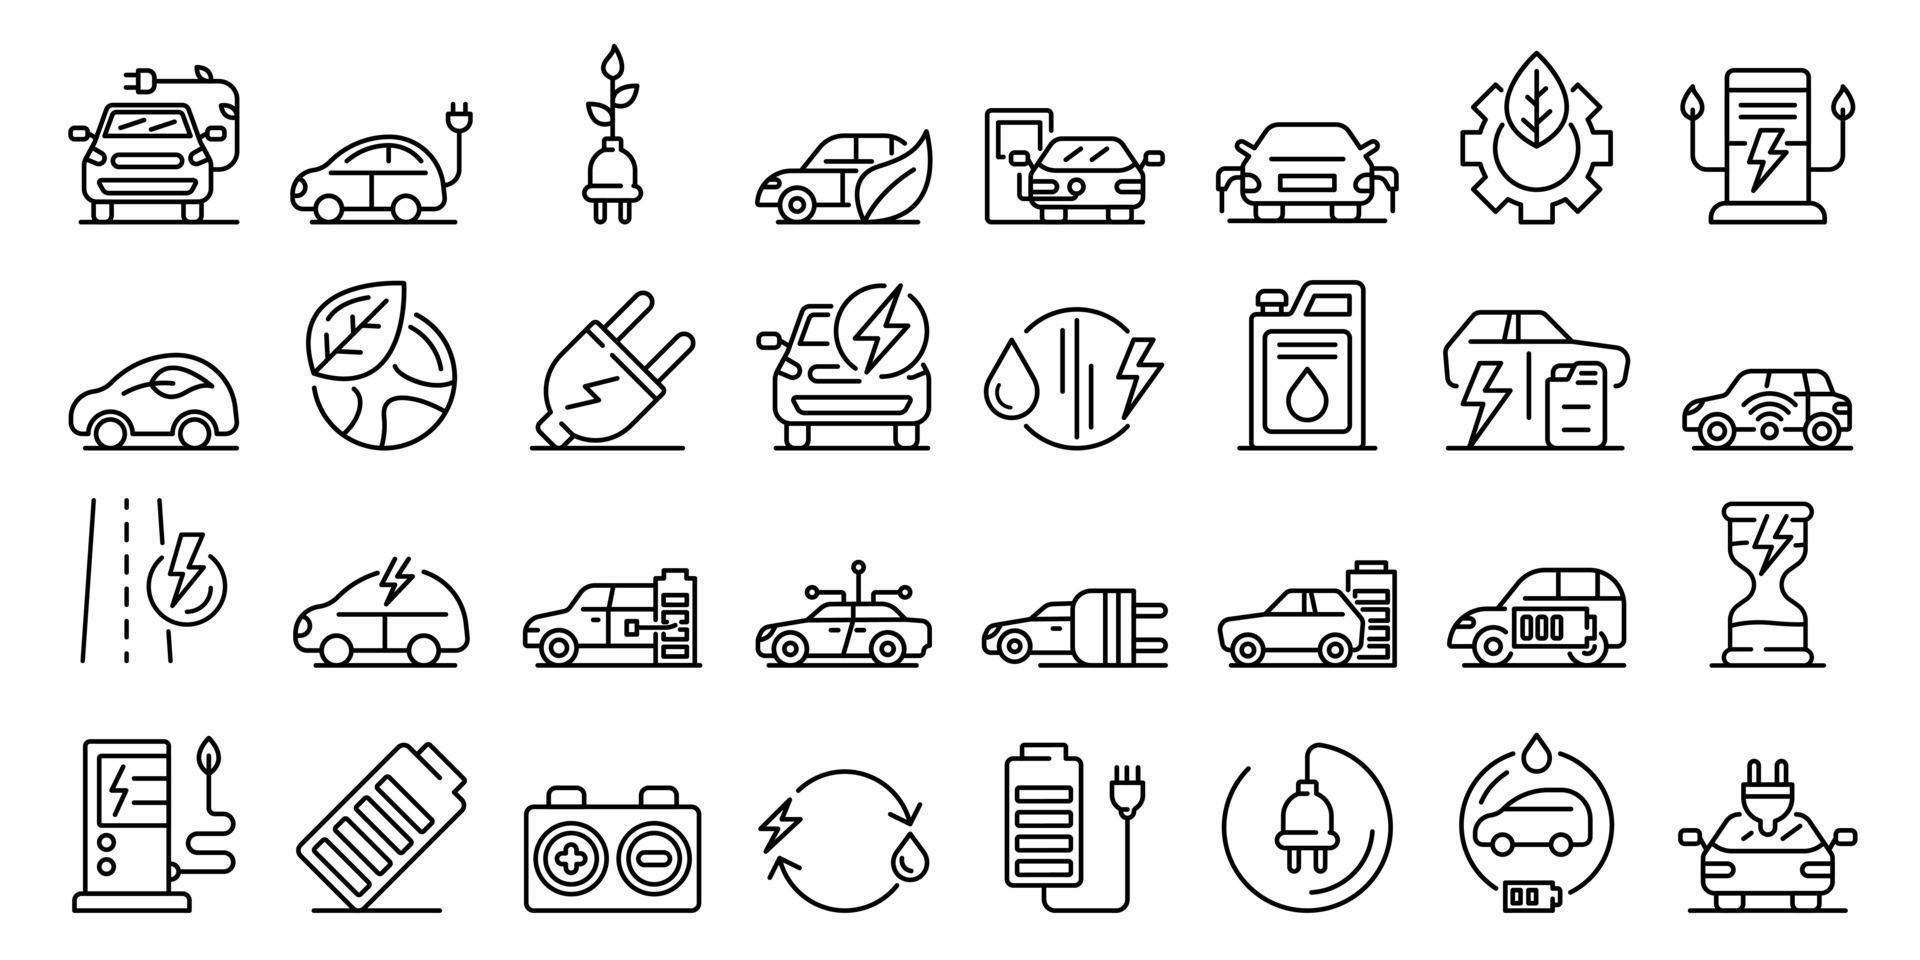 Hybrid icons set, outline style vector